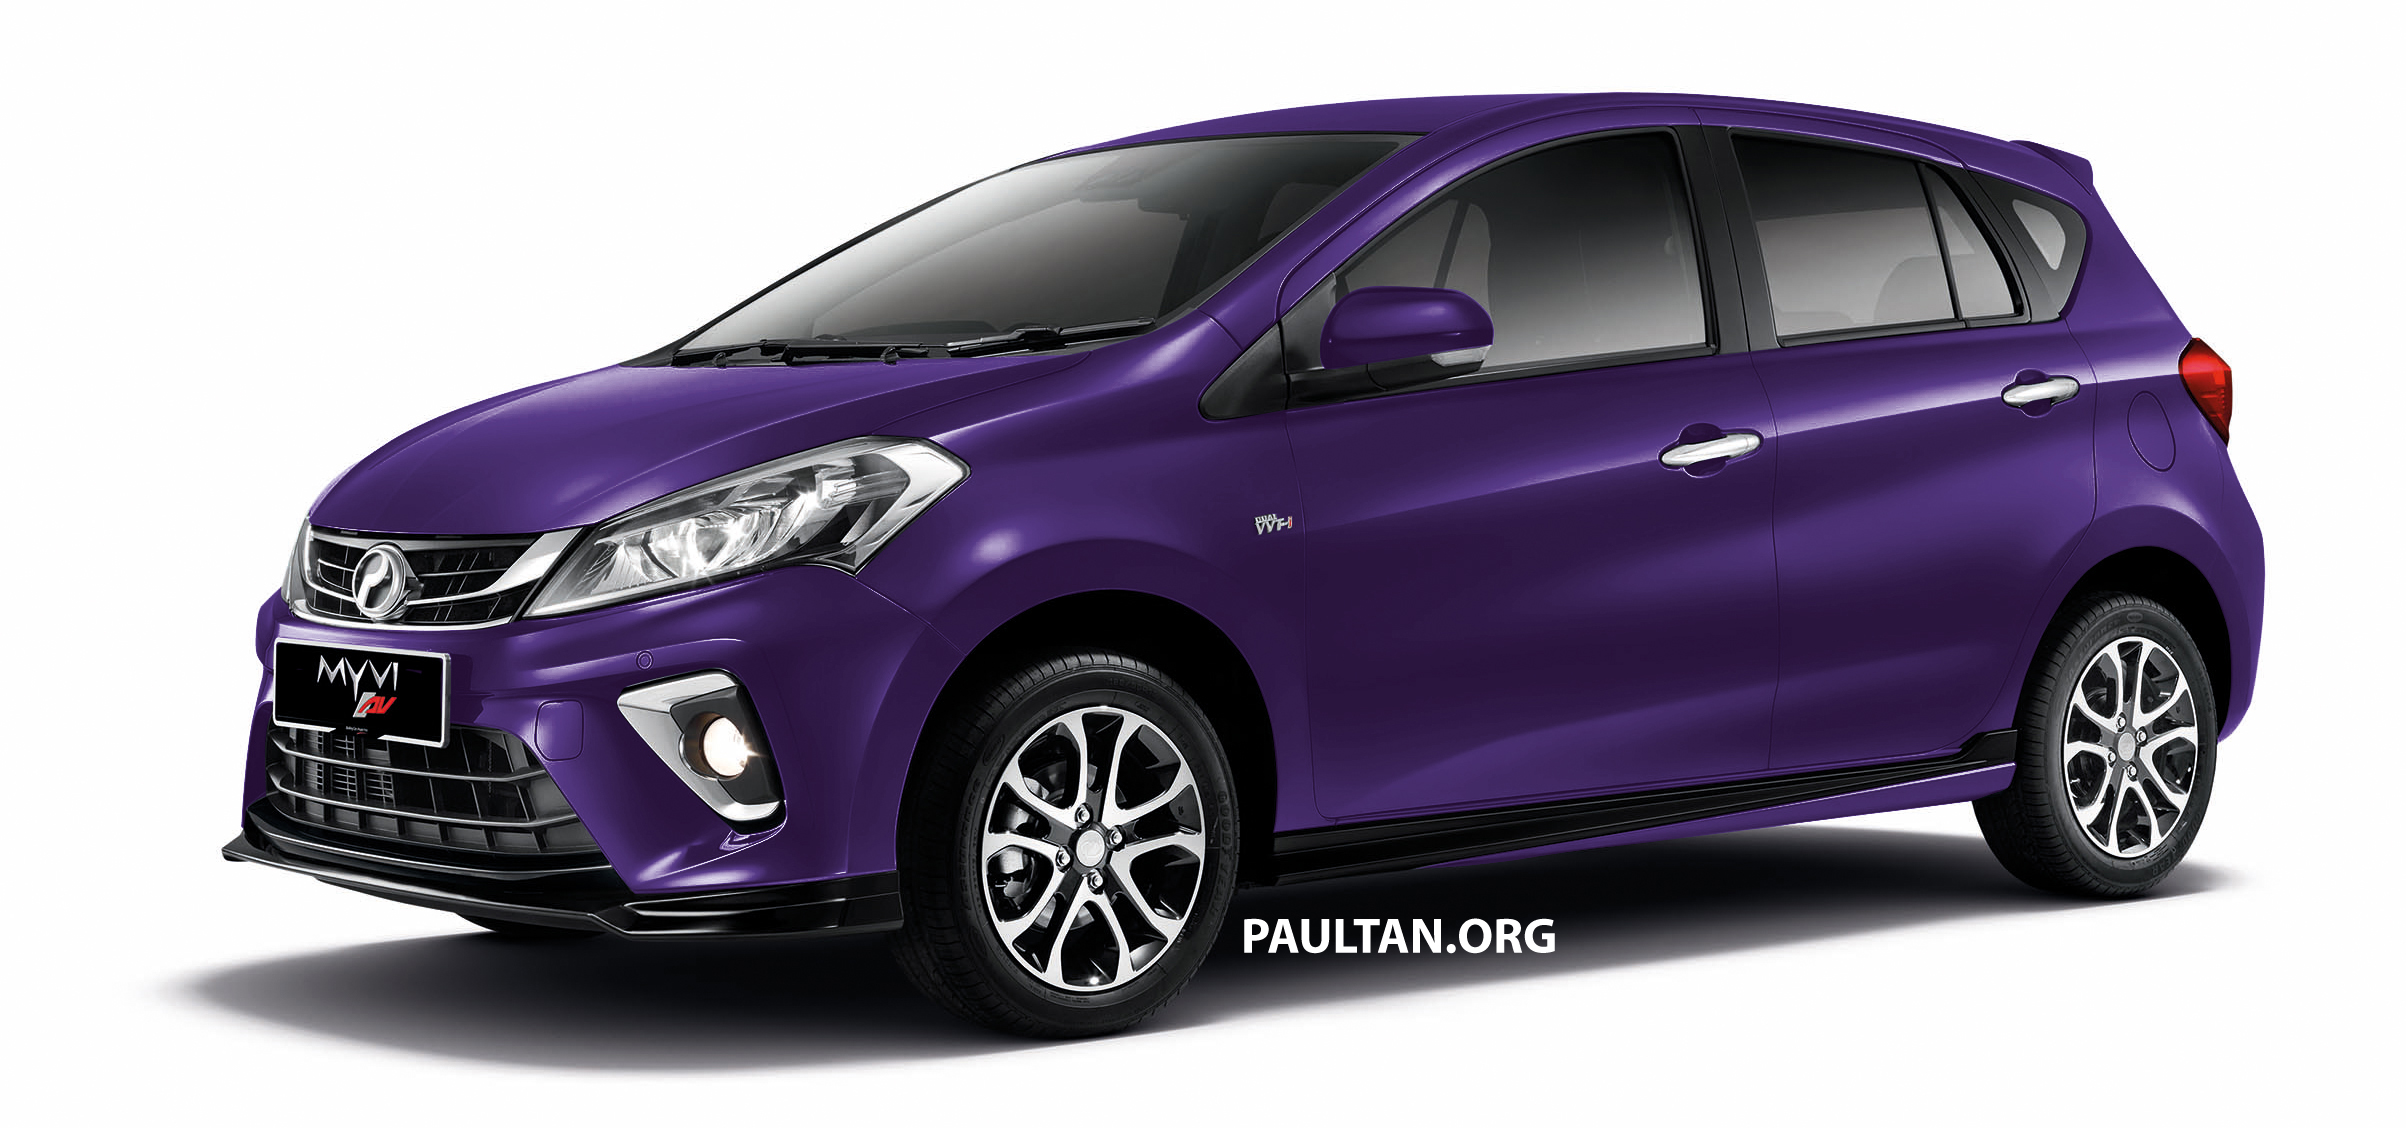 2018 Perodua Myvi officially launched in Malaysia – now 